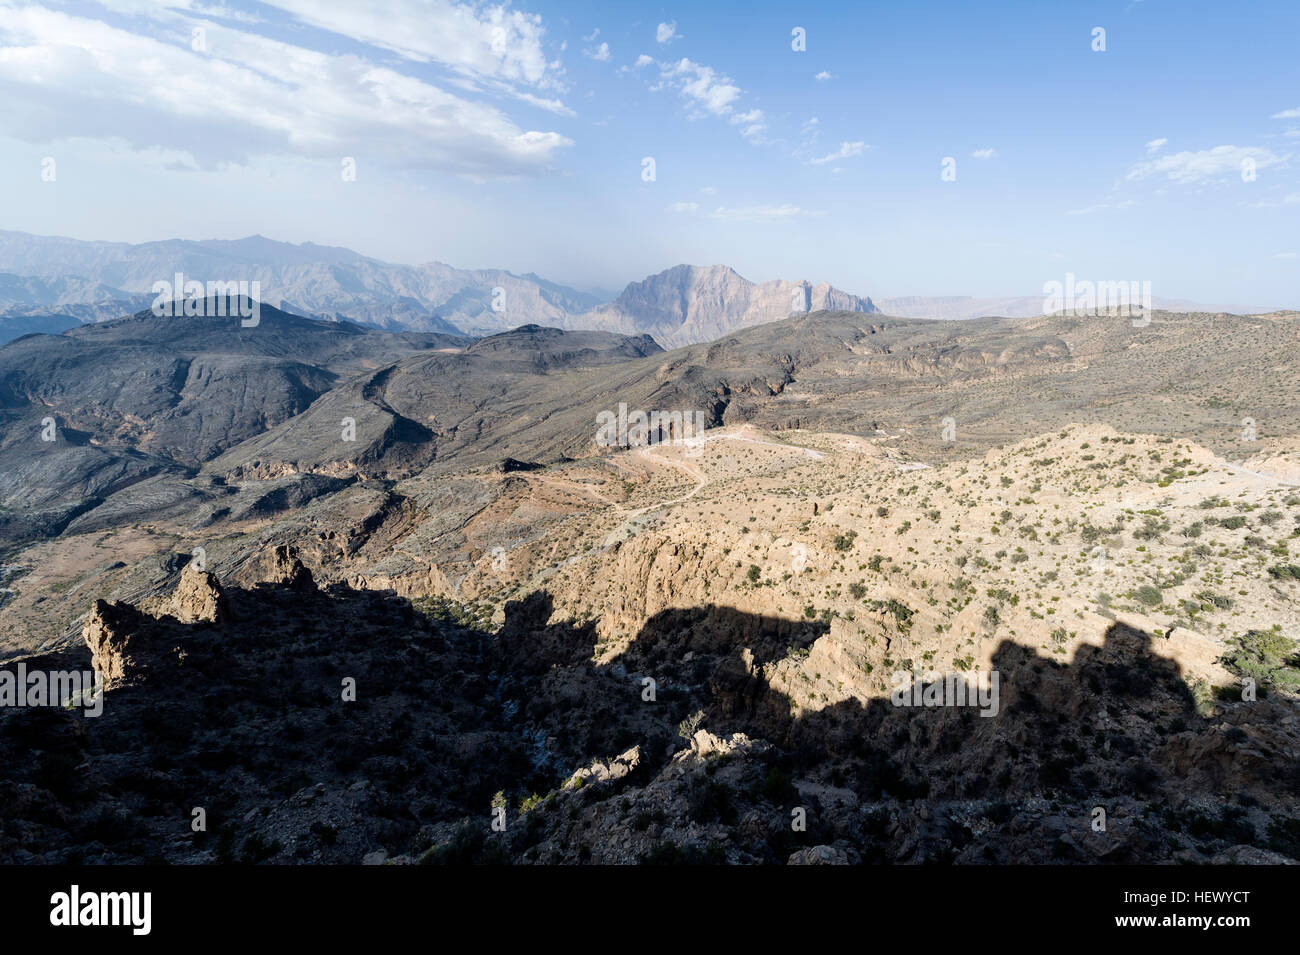 Arid jagged mountains overlook an eroded and inhospitable rocky desert valley. Stock Photo